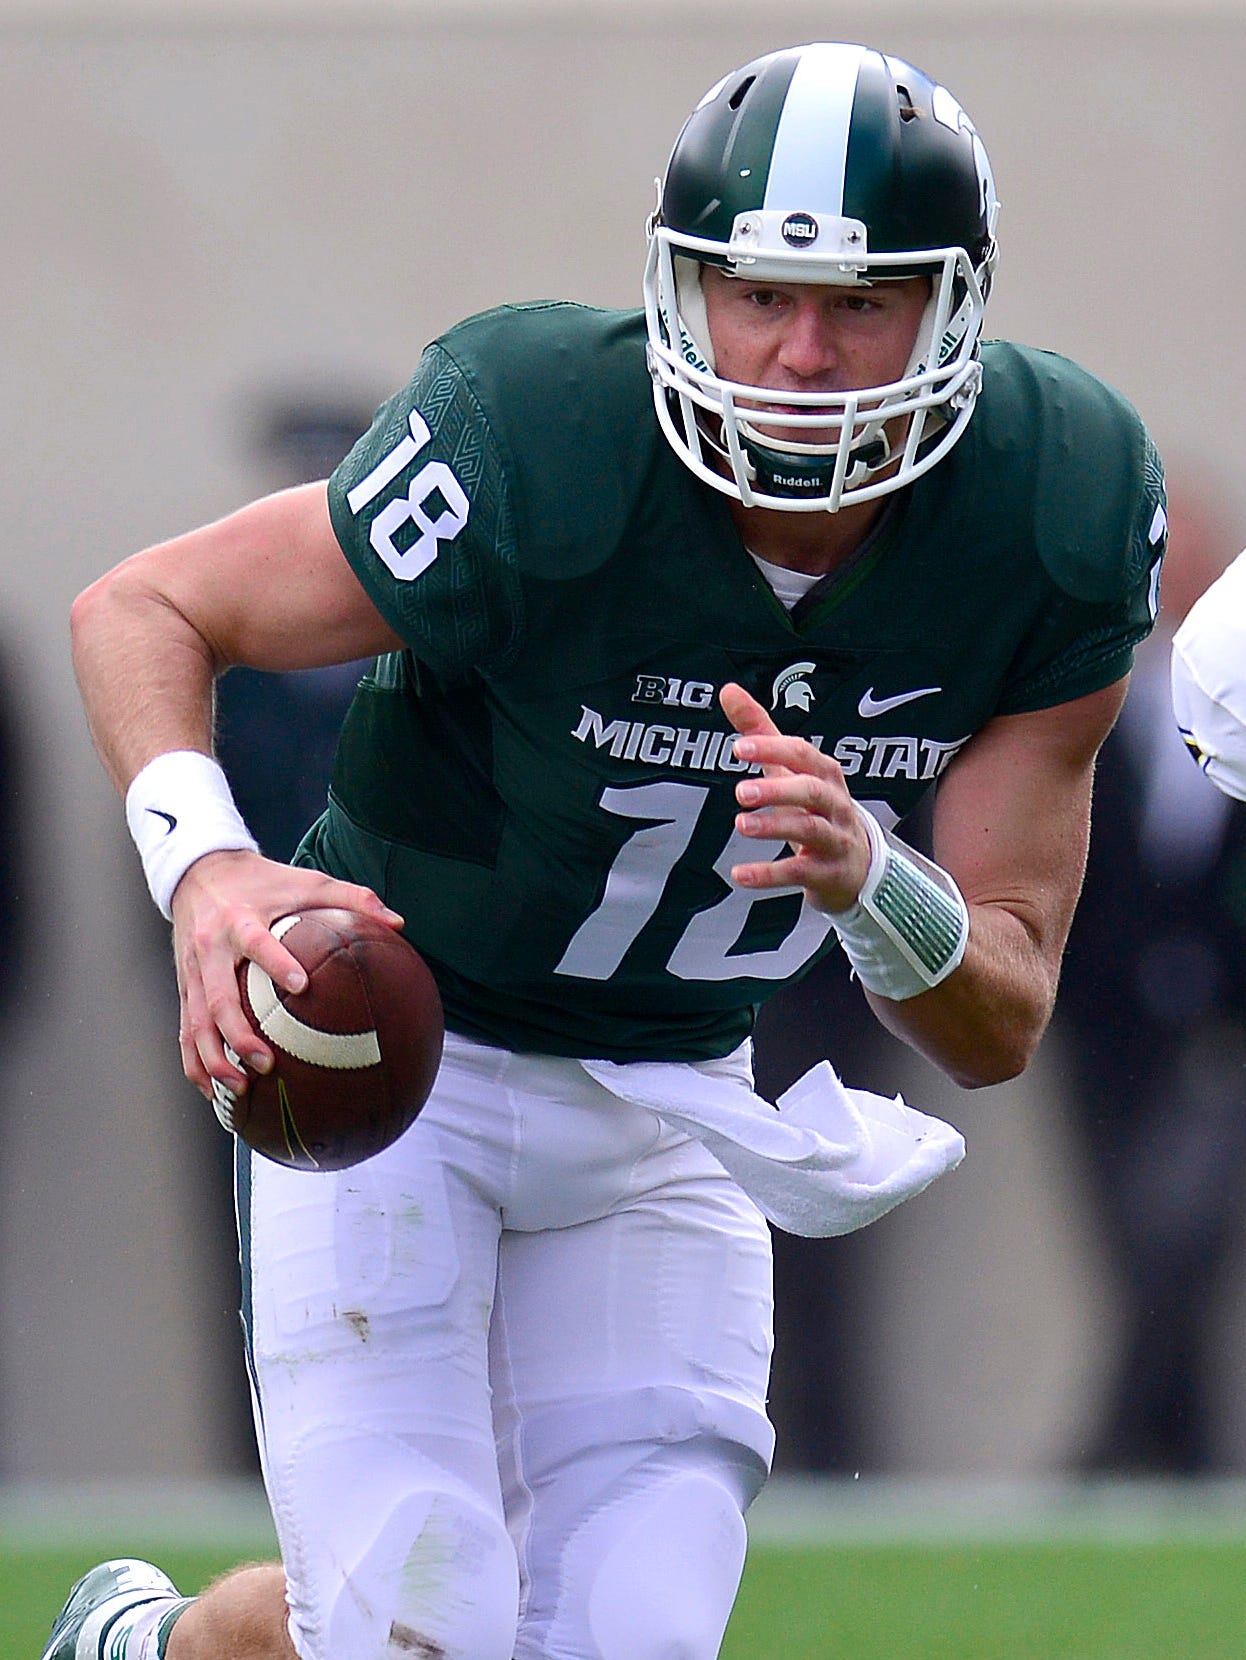 QUARTERBACK – Connor Cook, 2012-15: The winningest quarterback in program history was at the helm during one of the most successful stretches at Michigan State and certainly within the last quarter of a century. While leading MSU to a pair of Big Ten championships and a spot in the College Football Playoff, Cook threw for more yards (9,194) and touchdowns (71) than anyone in program history and earned first-team All-Big Ten honors as a senior.